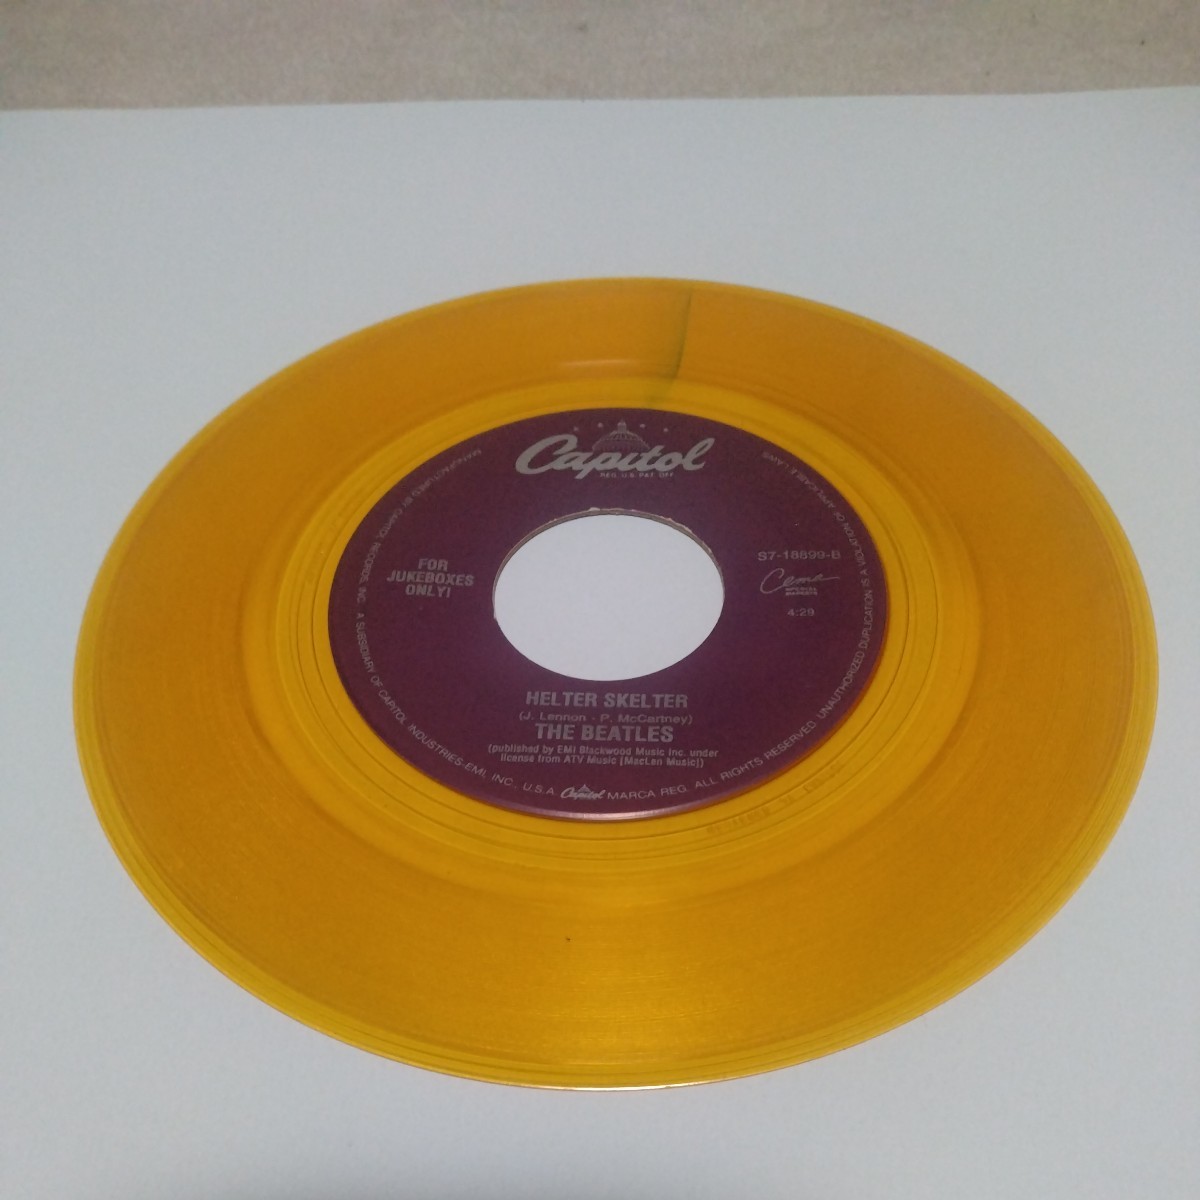 7"SINGLE Orange Vinyl THE BEATLES/GOT TO GET YOU INYO MY LIFE cw HELTER SKELTER USA CAPITOL Cema Special Markets S7-18899_画像4